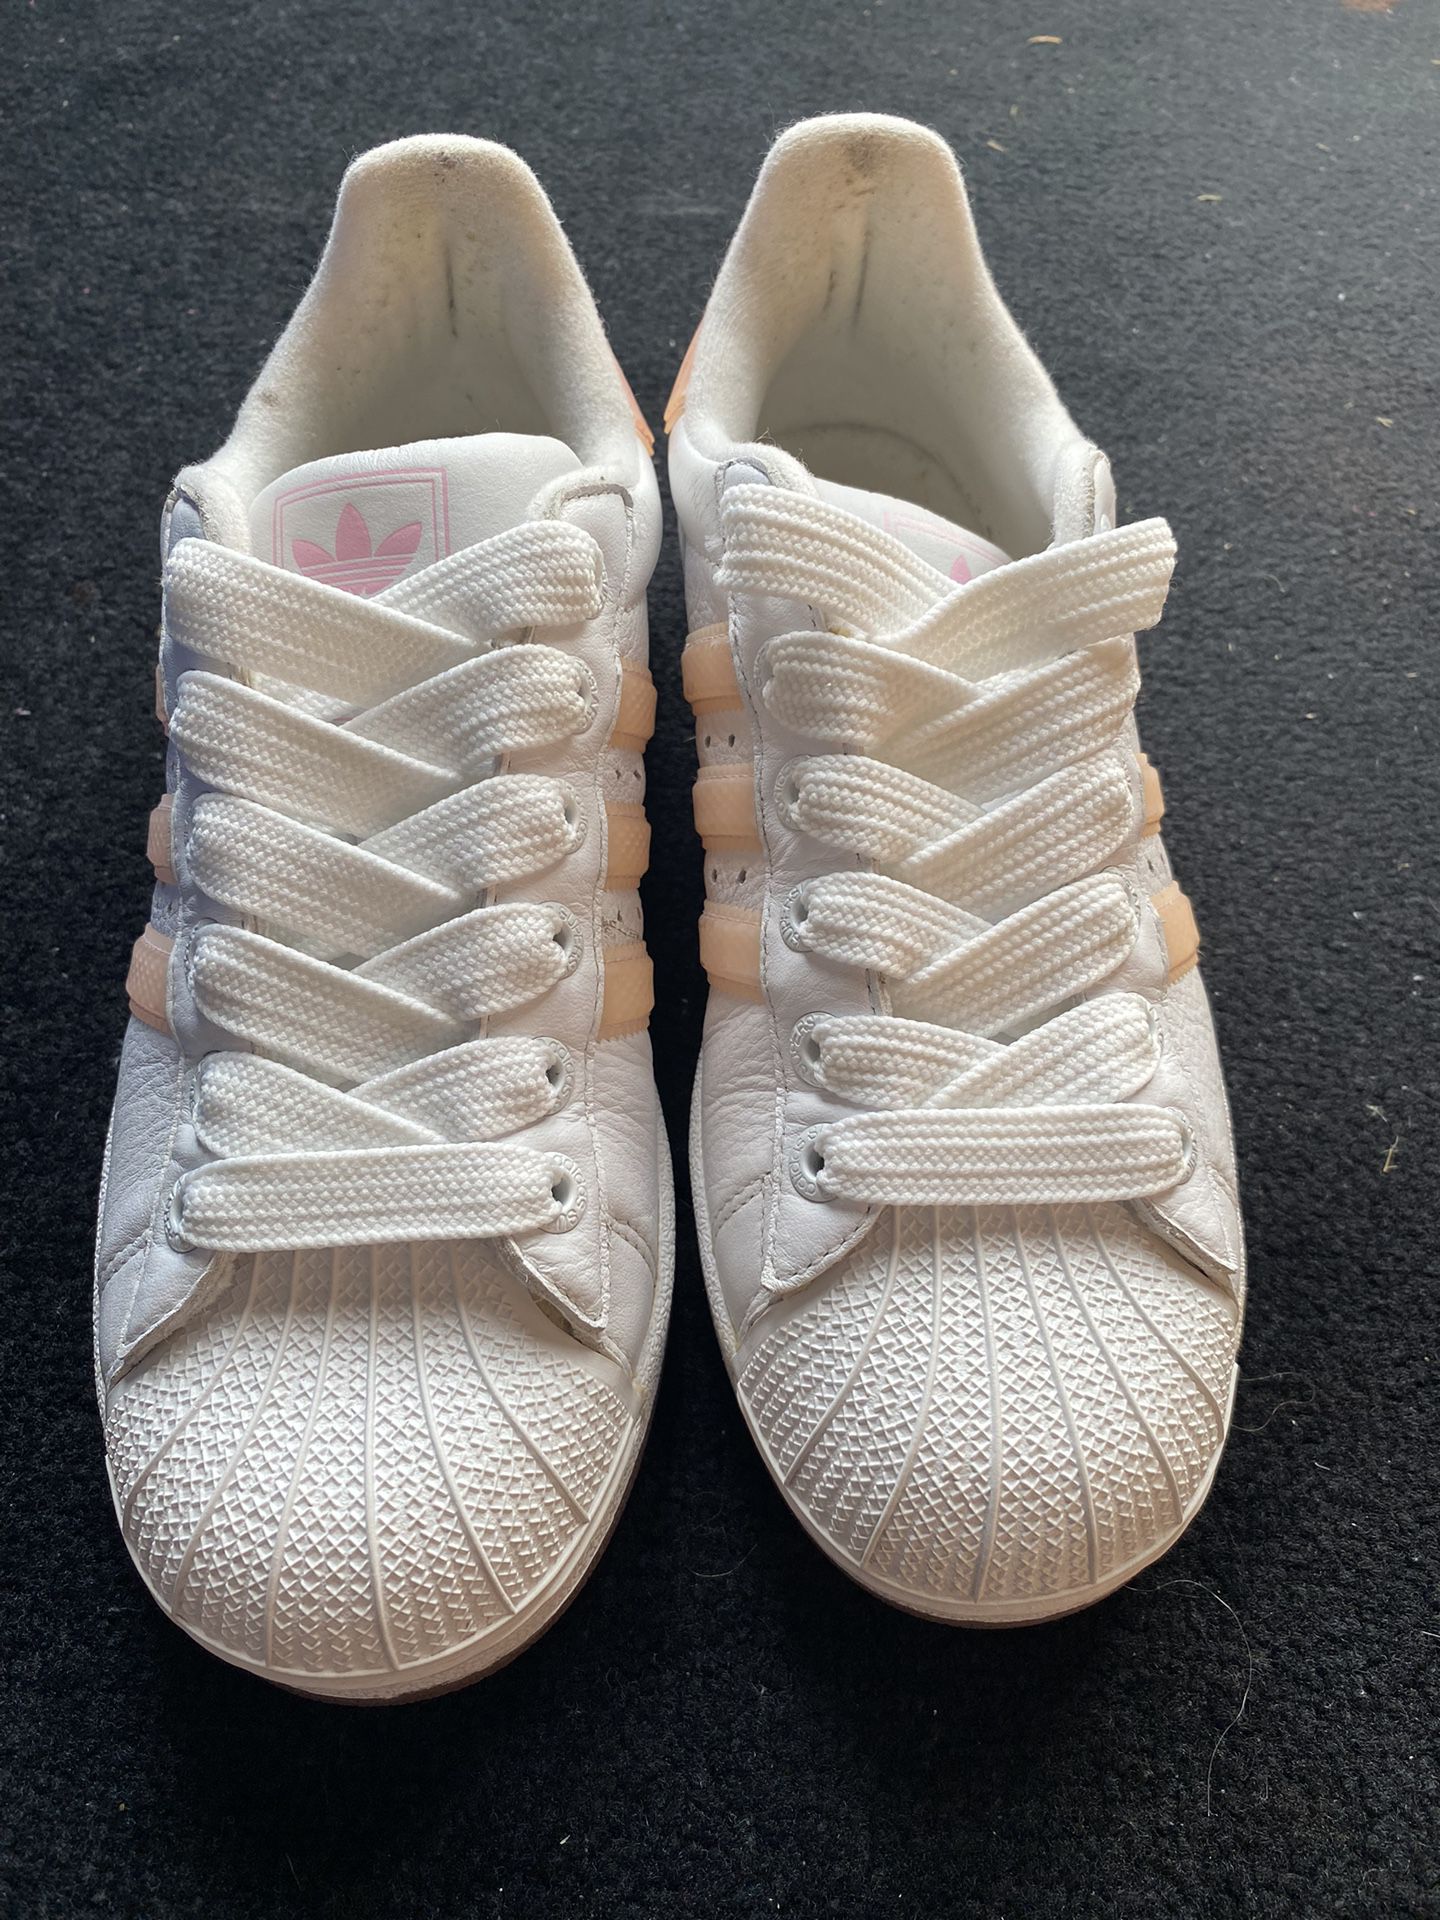 Adidas Superstar Mens 8 Womens 10 for Sale in Woodburn, OR - OfferUp